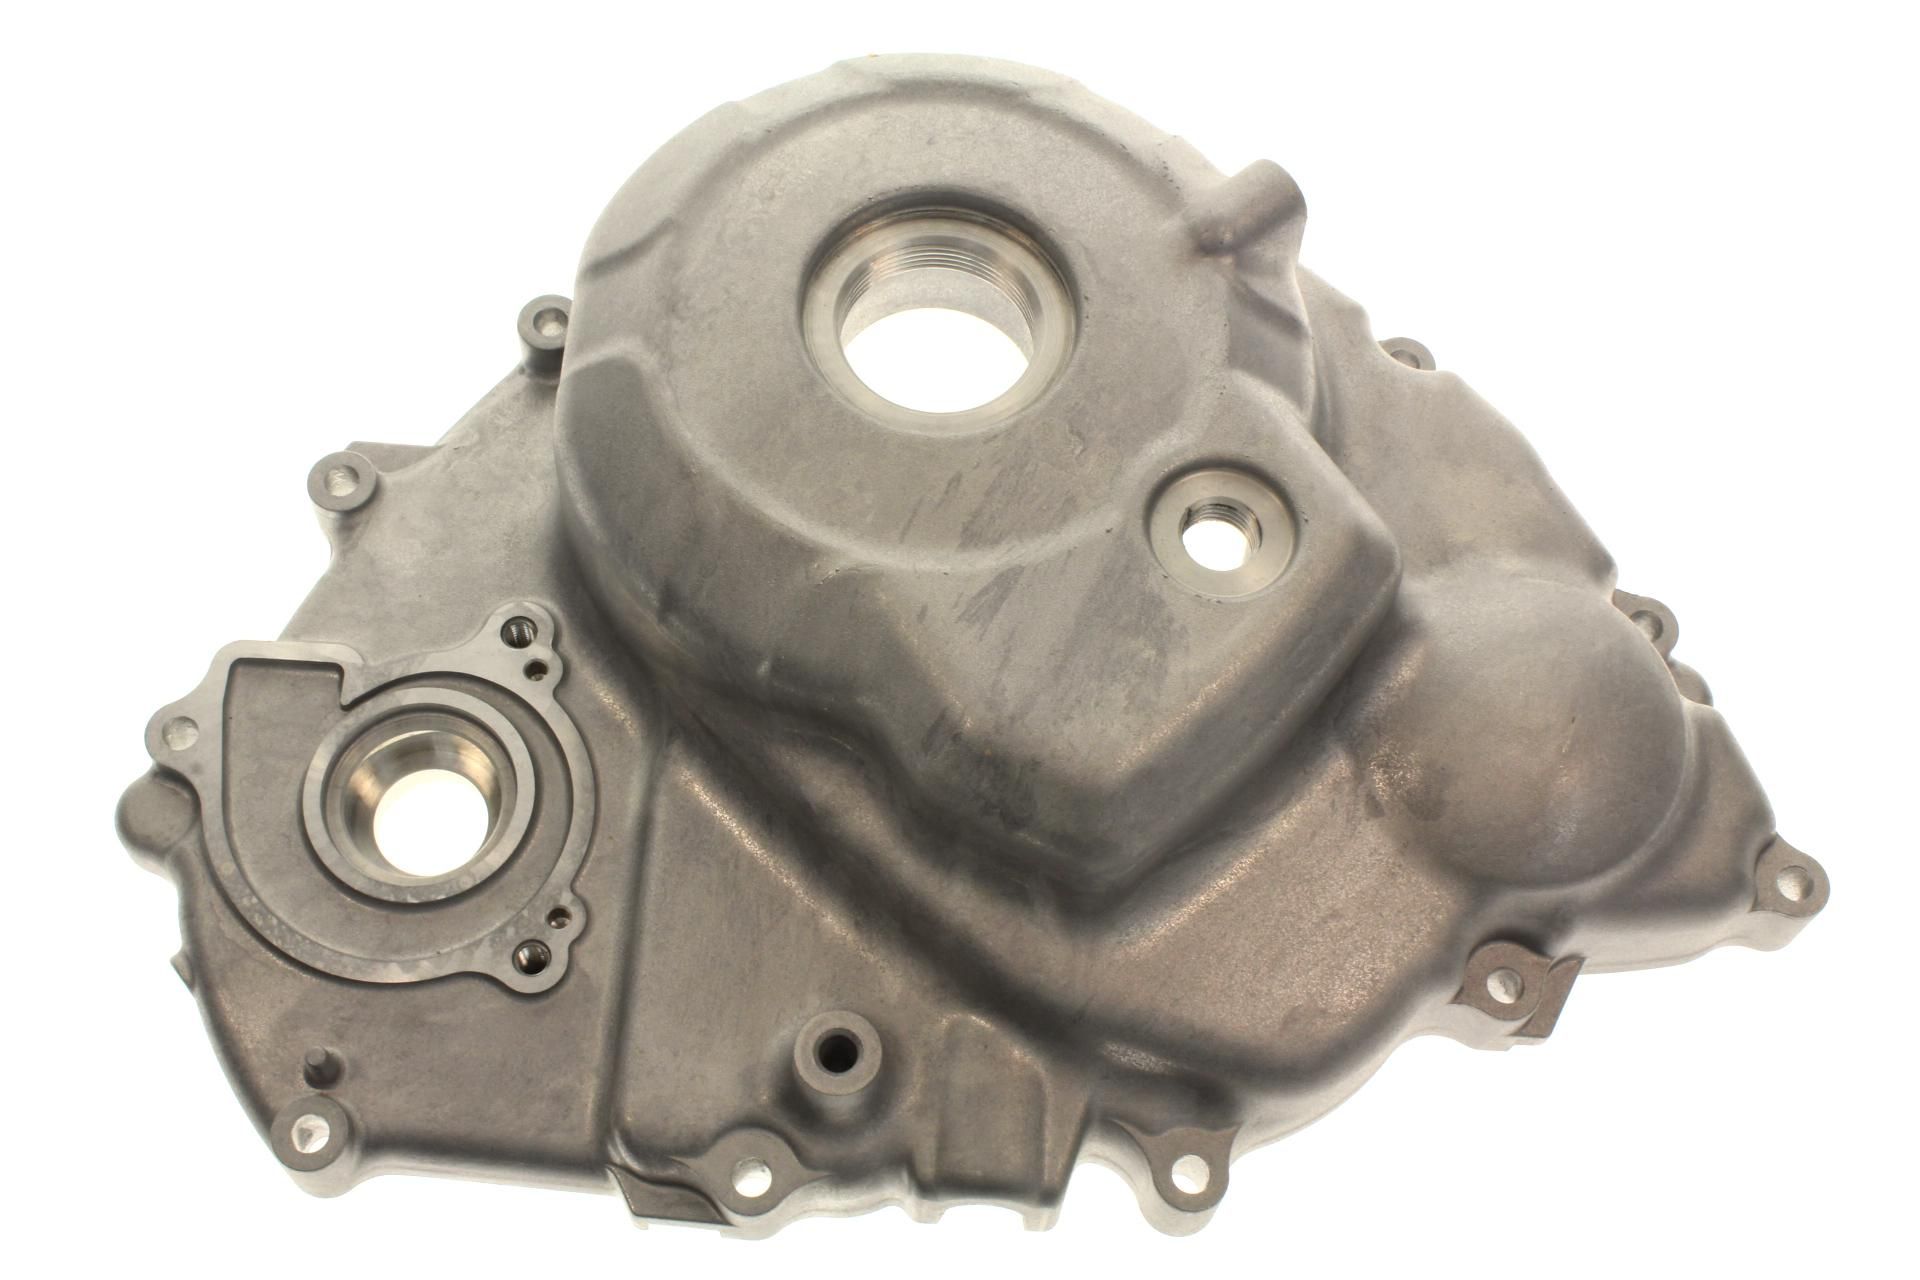 3B4-15411-00-00 Superseded by 3B4-15411-01-00 - COVER, CRANKCASE 1